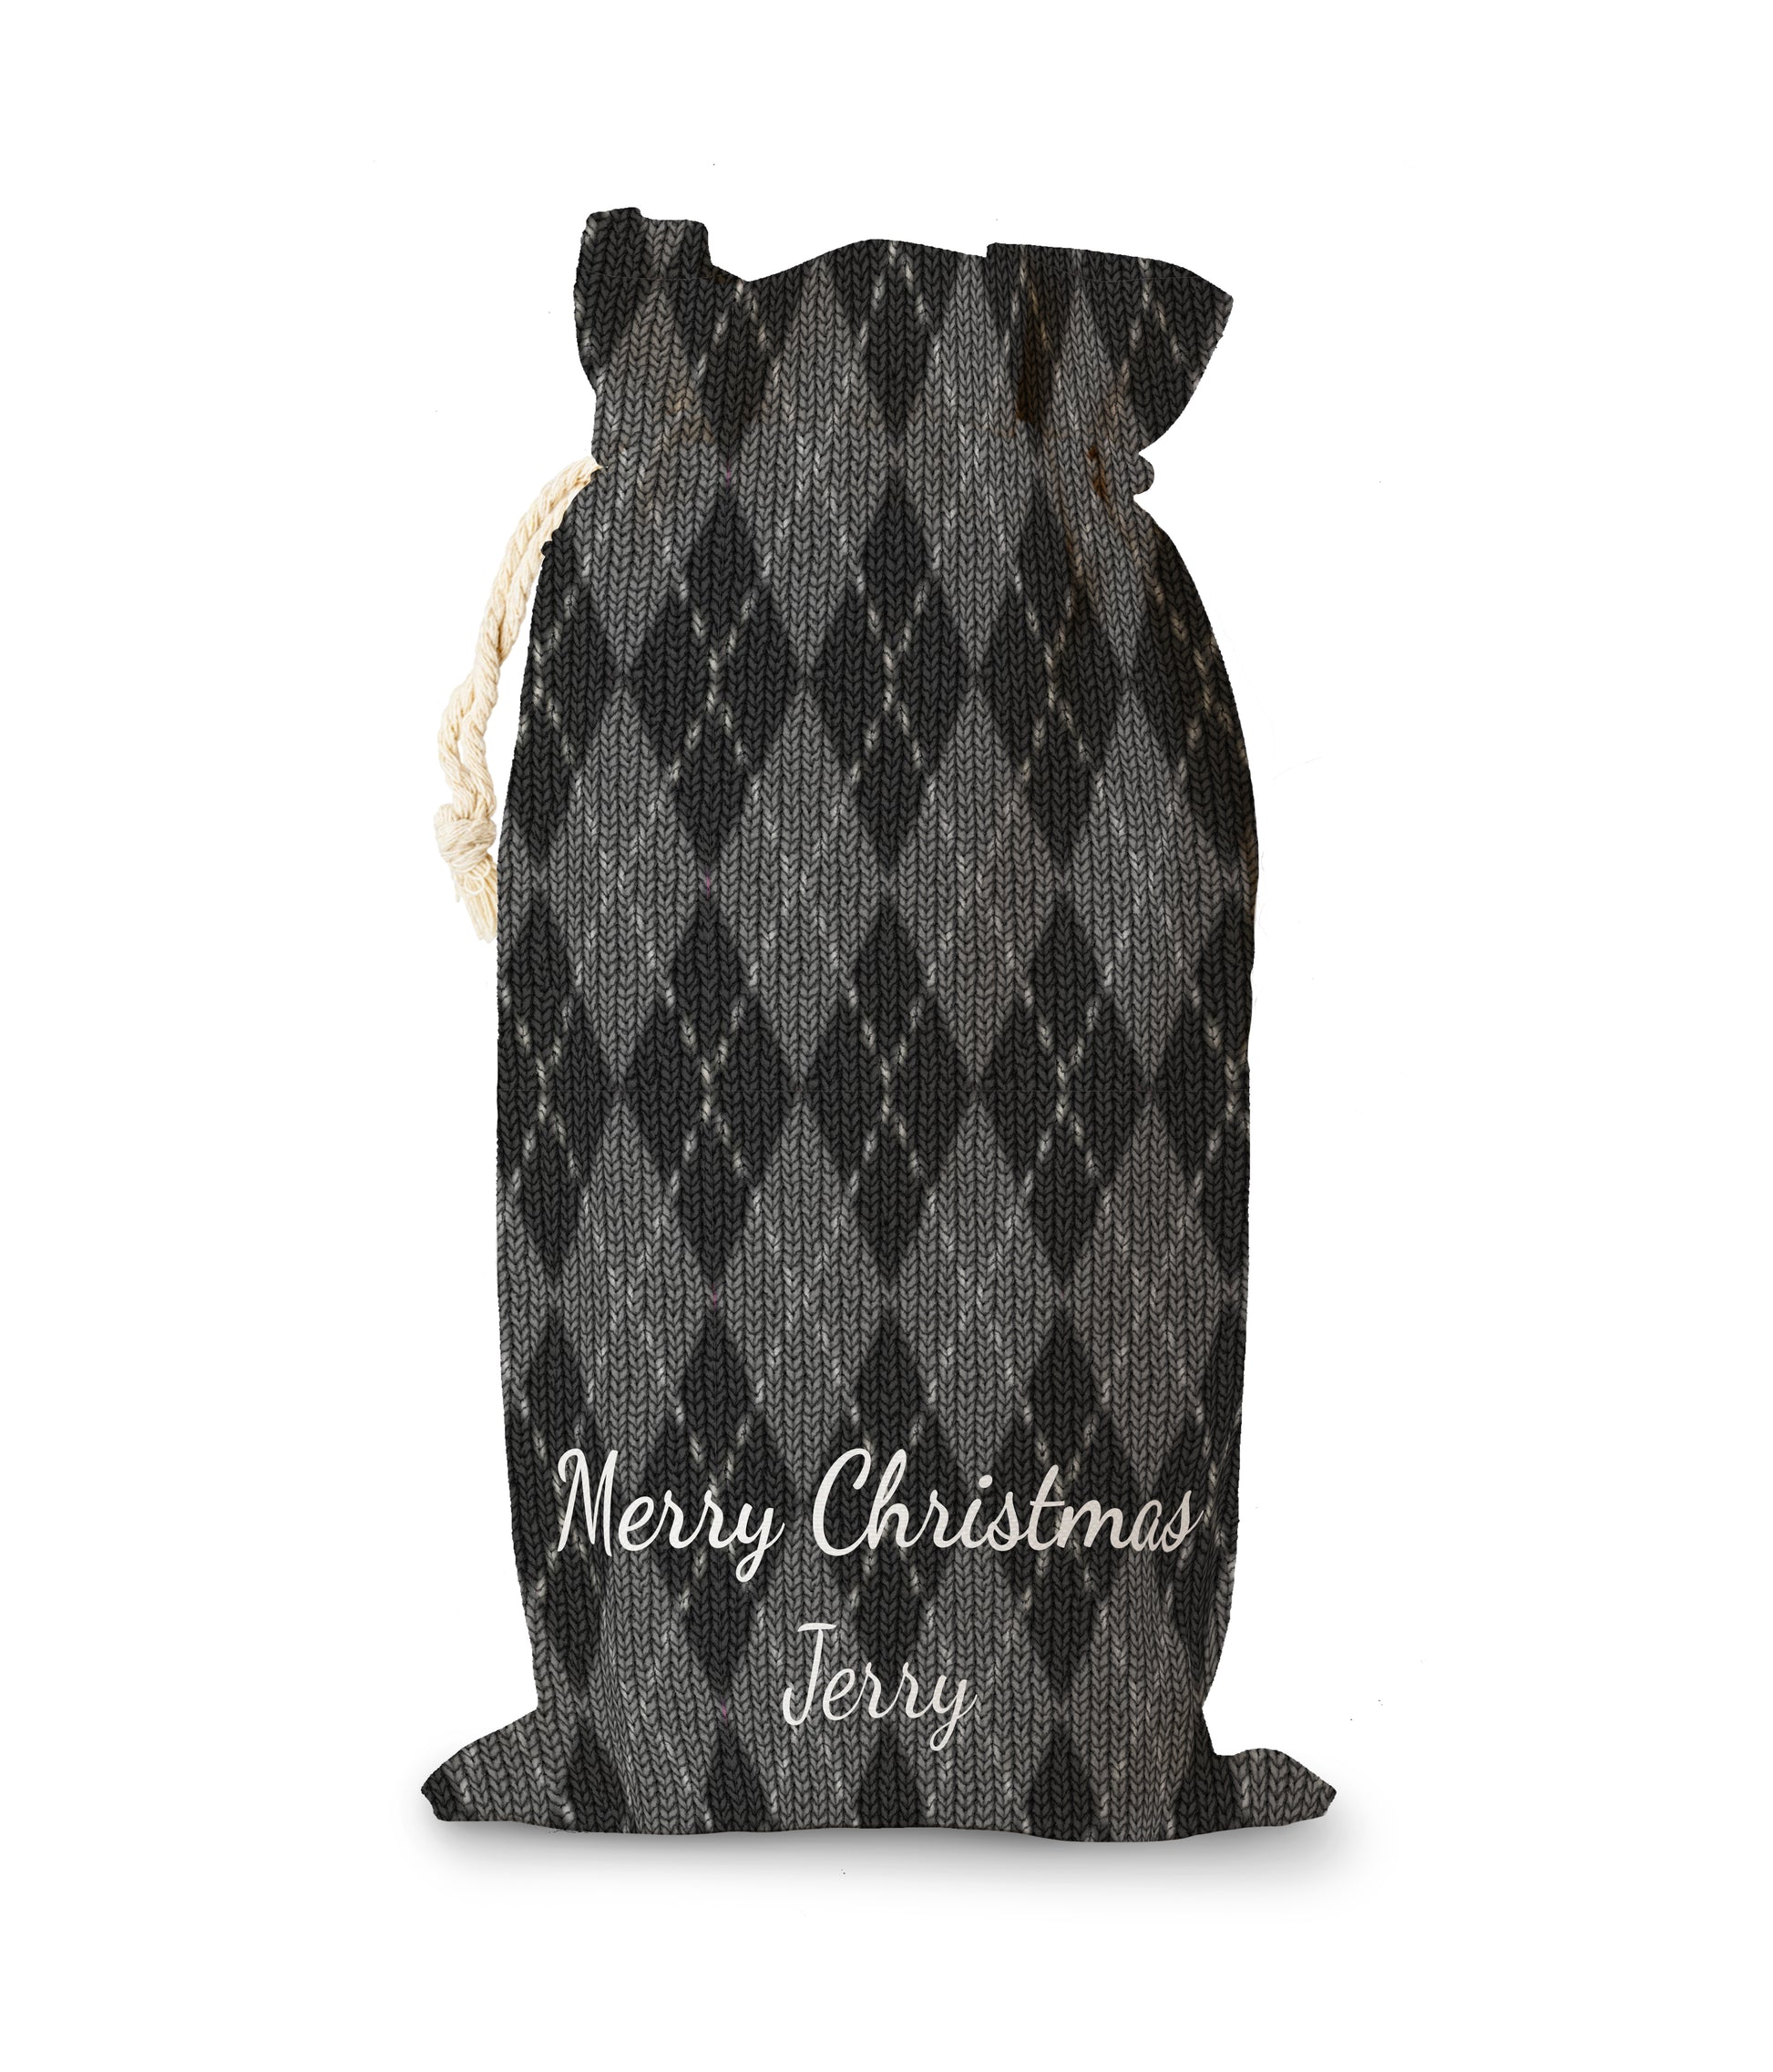 Personalised Christmas Sack with Name and Text